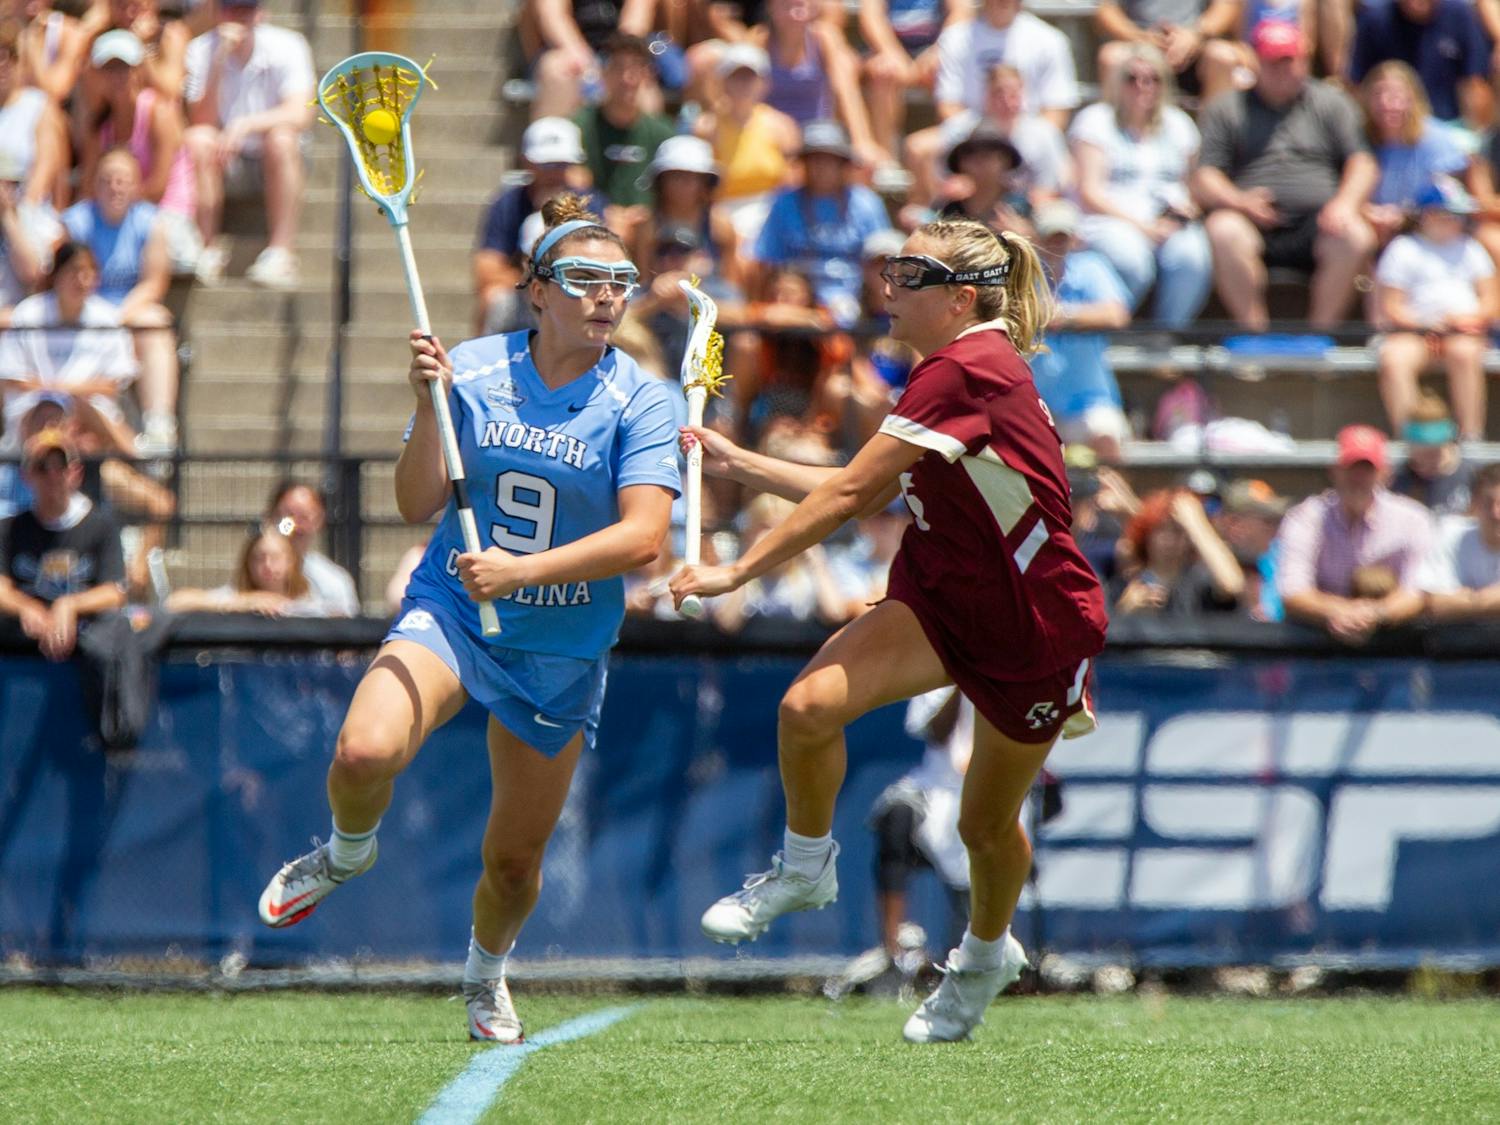 Junior midfielder Nicole Humphrey (9) cradles the ball during UNC's NCAA Tournament Championship Final against Boston College at Homewood Field in Baltimore, Md. on Sunday, May 29, 2022. UNC won 12-11.